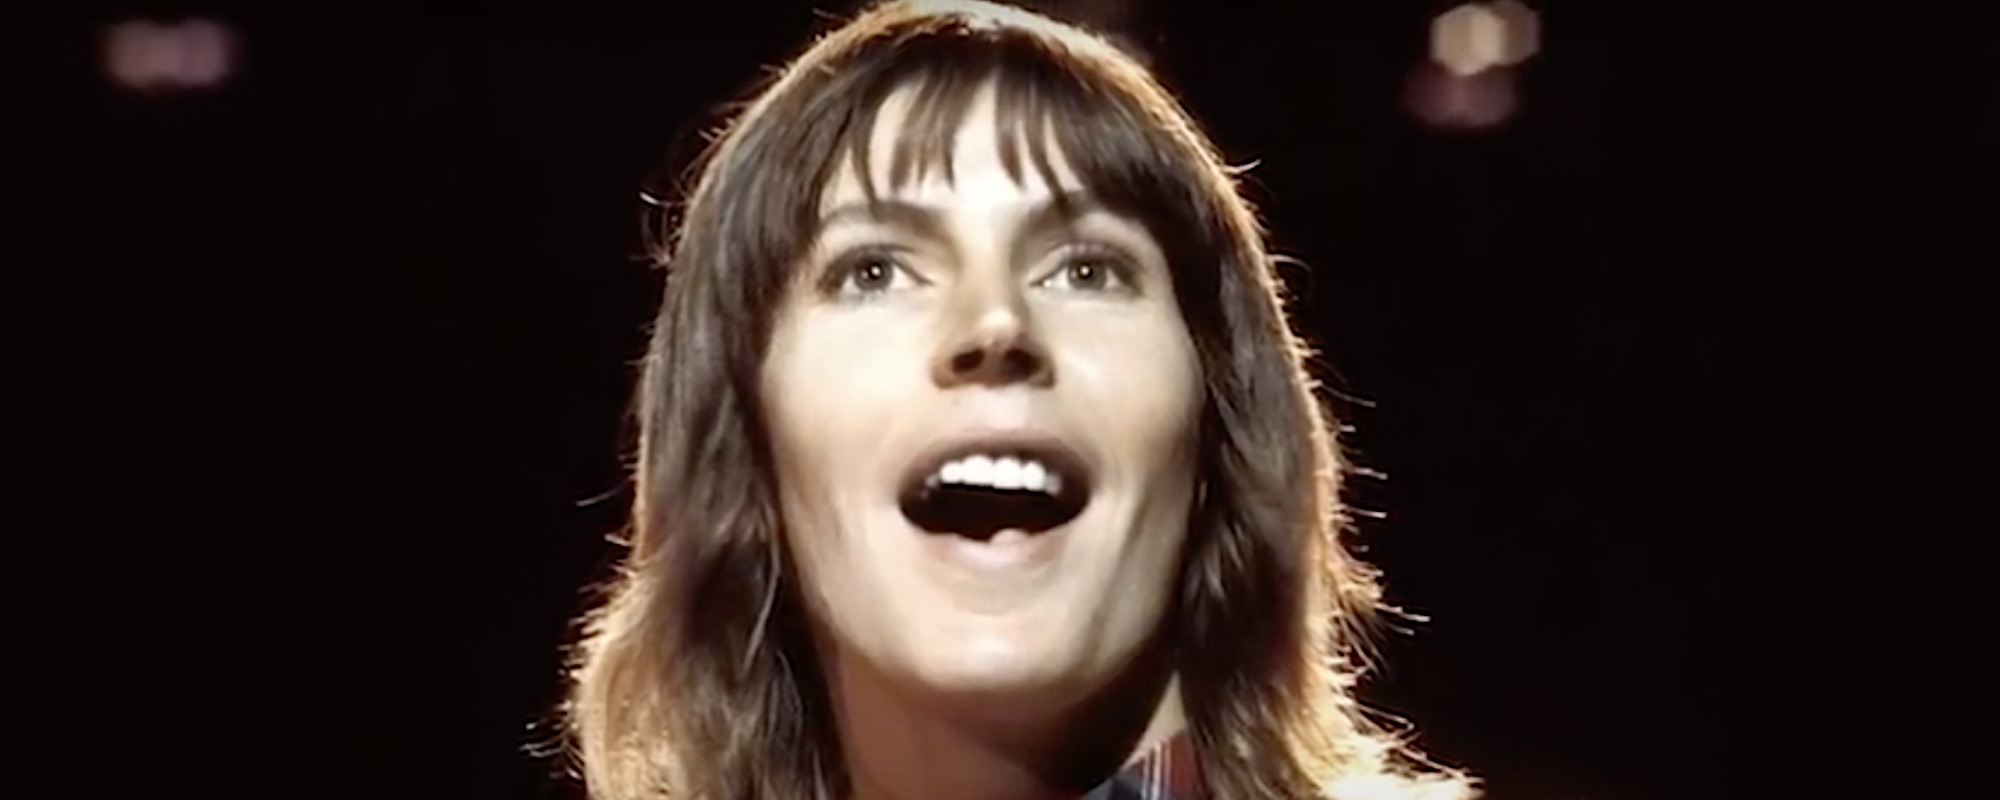 Helen Reddy’s “I Am Woman” Turns 50, Inspires New Video, Women’s History Month Campaign